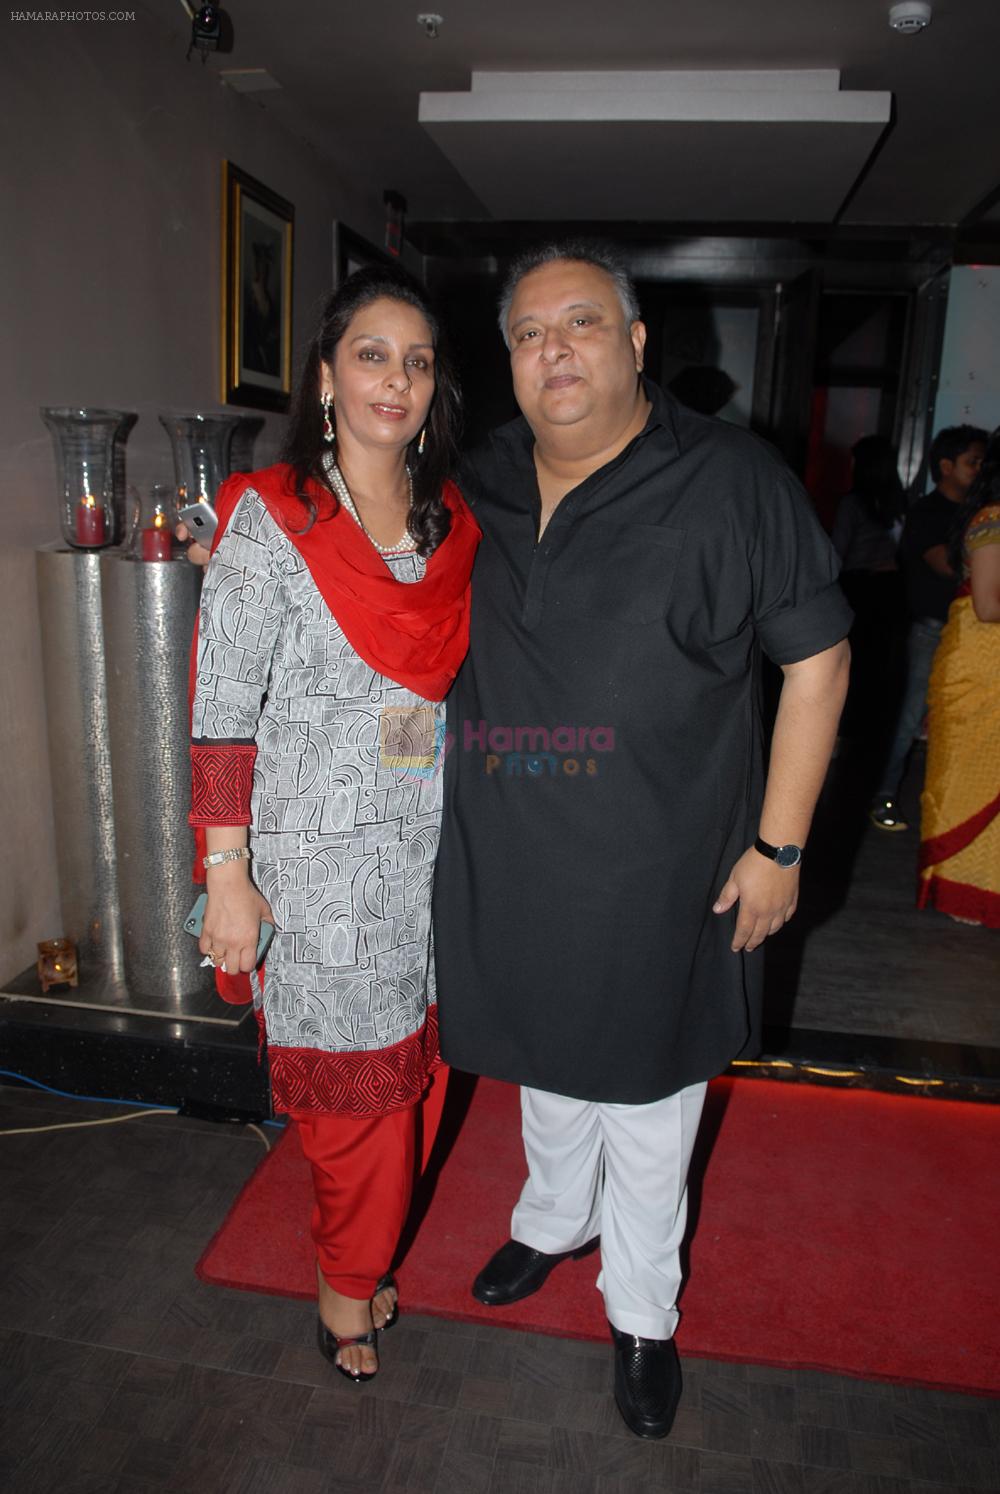 Praveen Khan and Shujaat Khan at the launch of singer Azaan Khan's debut album Philo- sufi in New Delhi on 30th March 2012